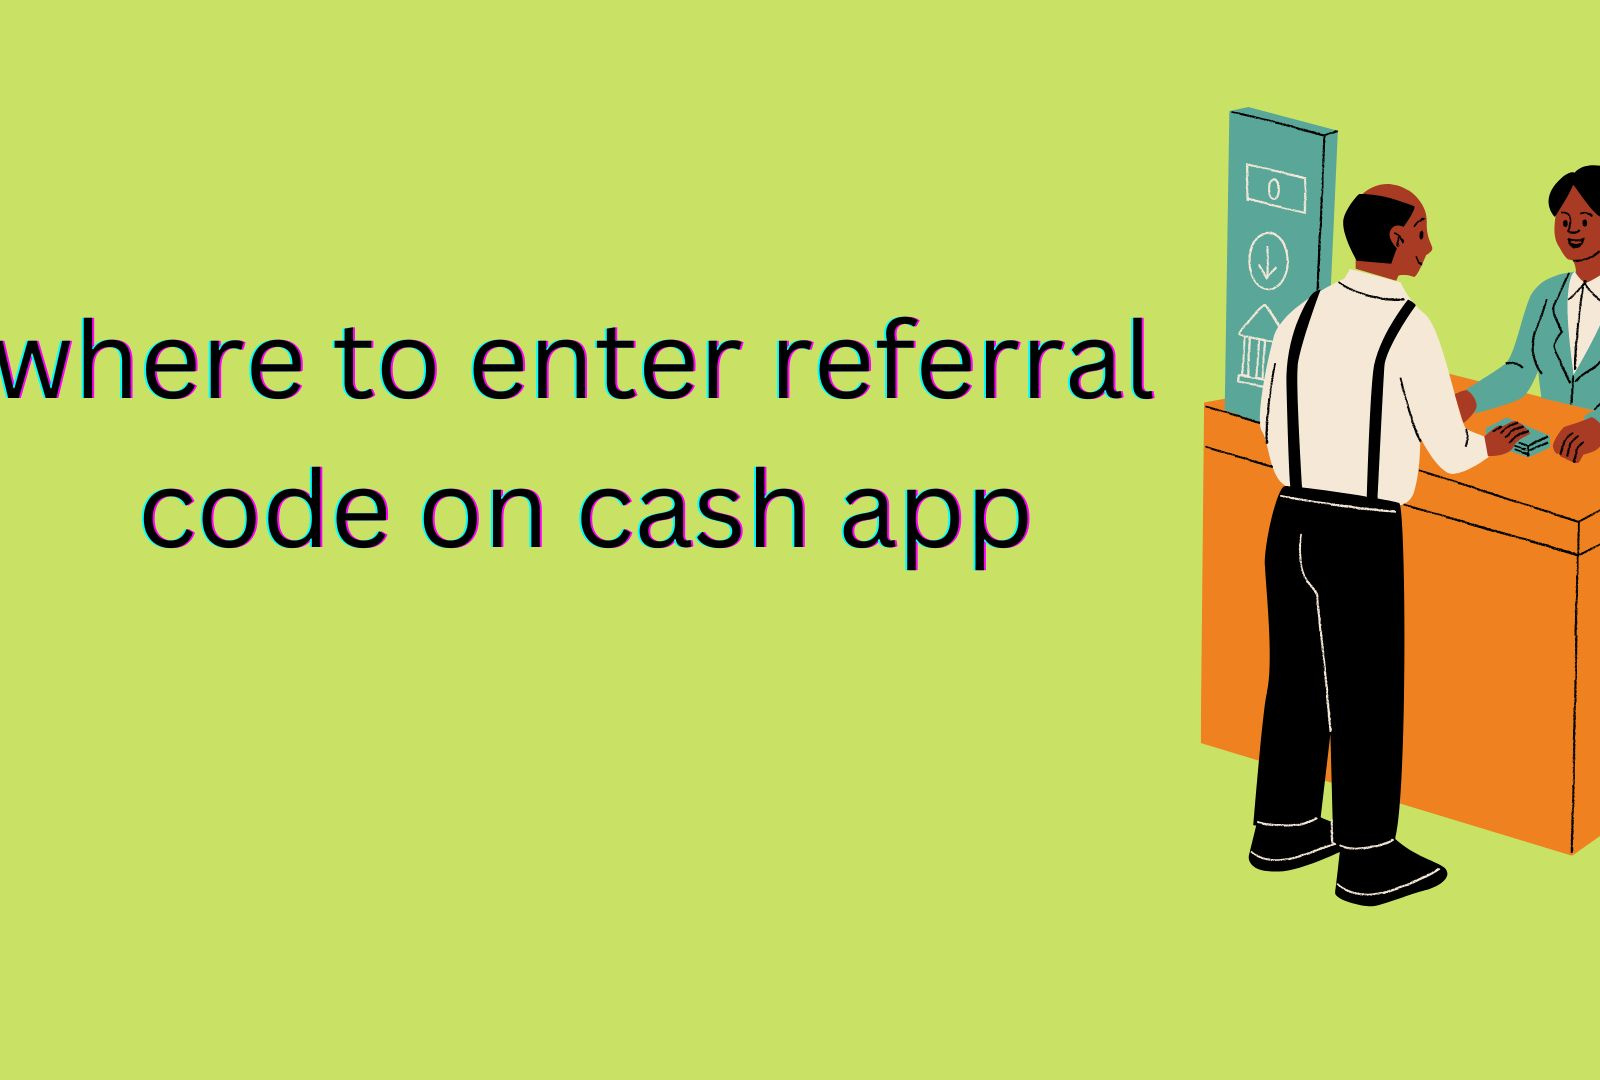 How to enter referral code on cash app by kamely smith on Dribbble